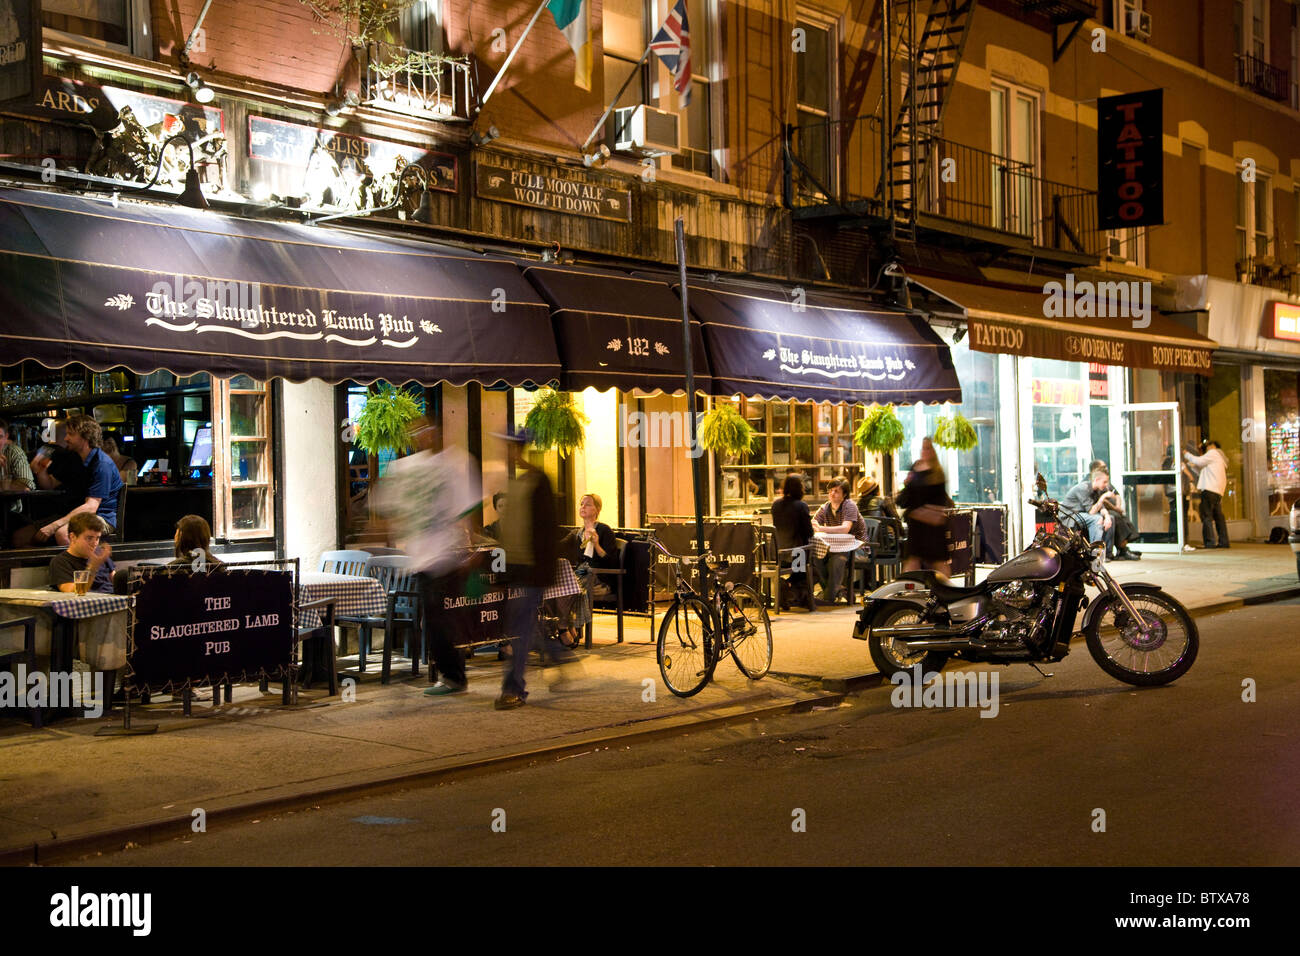 Motorbike parked outside The Slaughtered Lamb Pub in Greenwich Village, New York Stock Photo